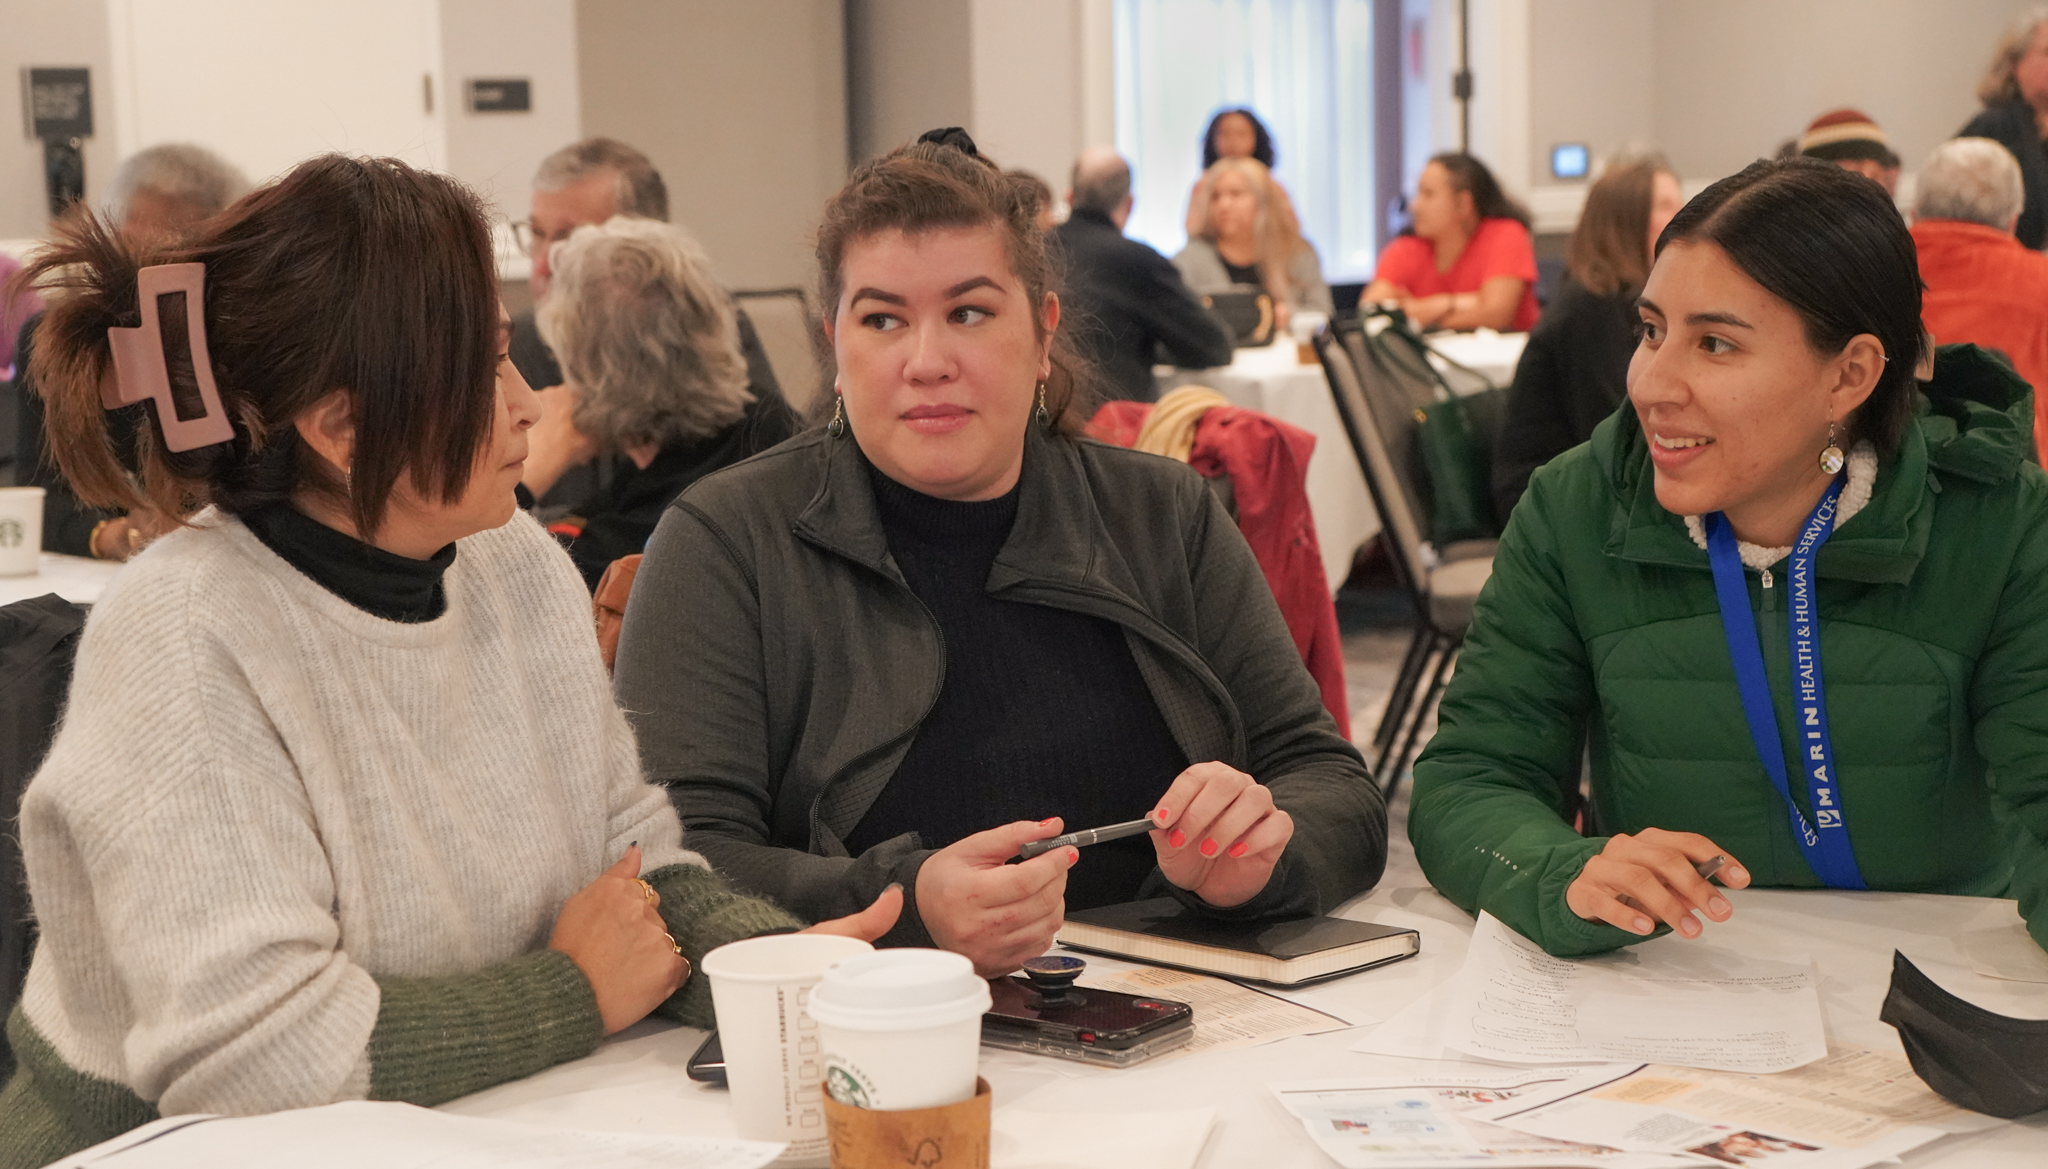 Three women sit at a table during an informational session on participatory budgeting.